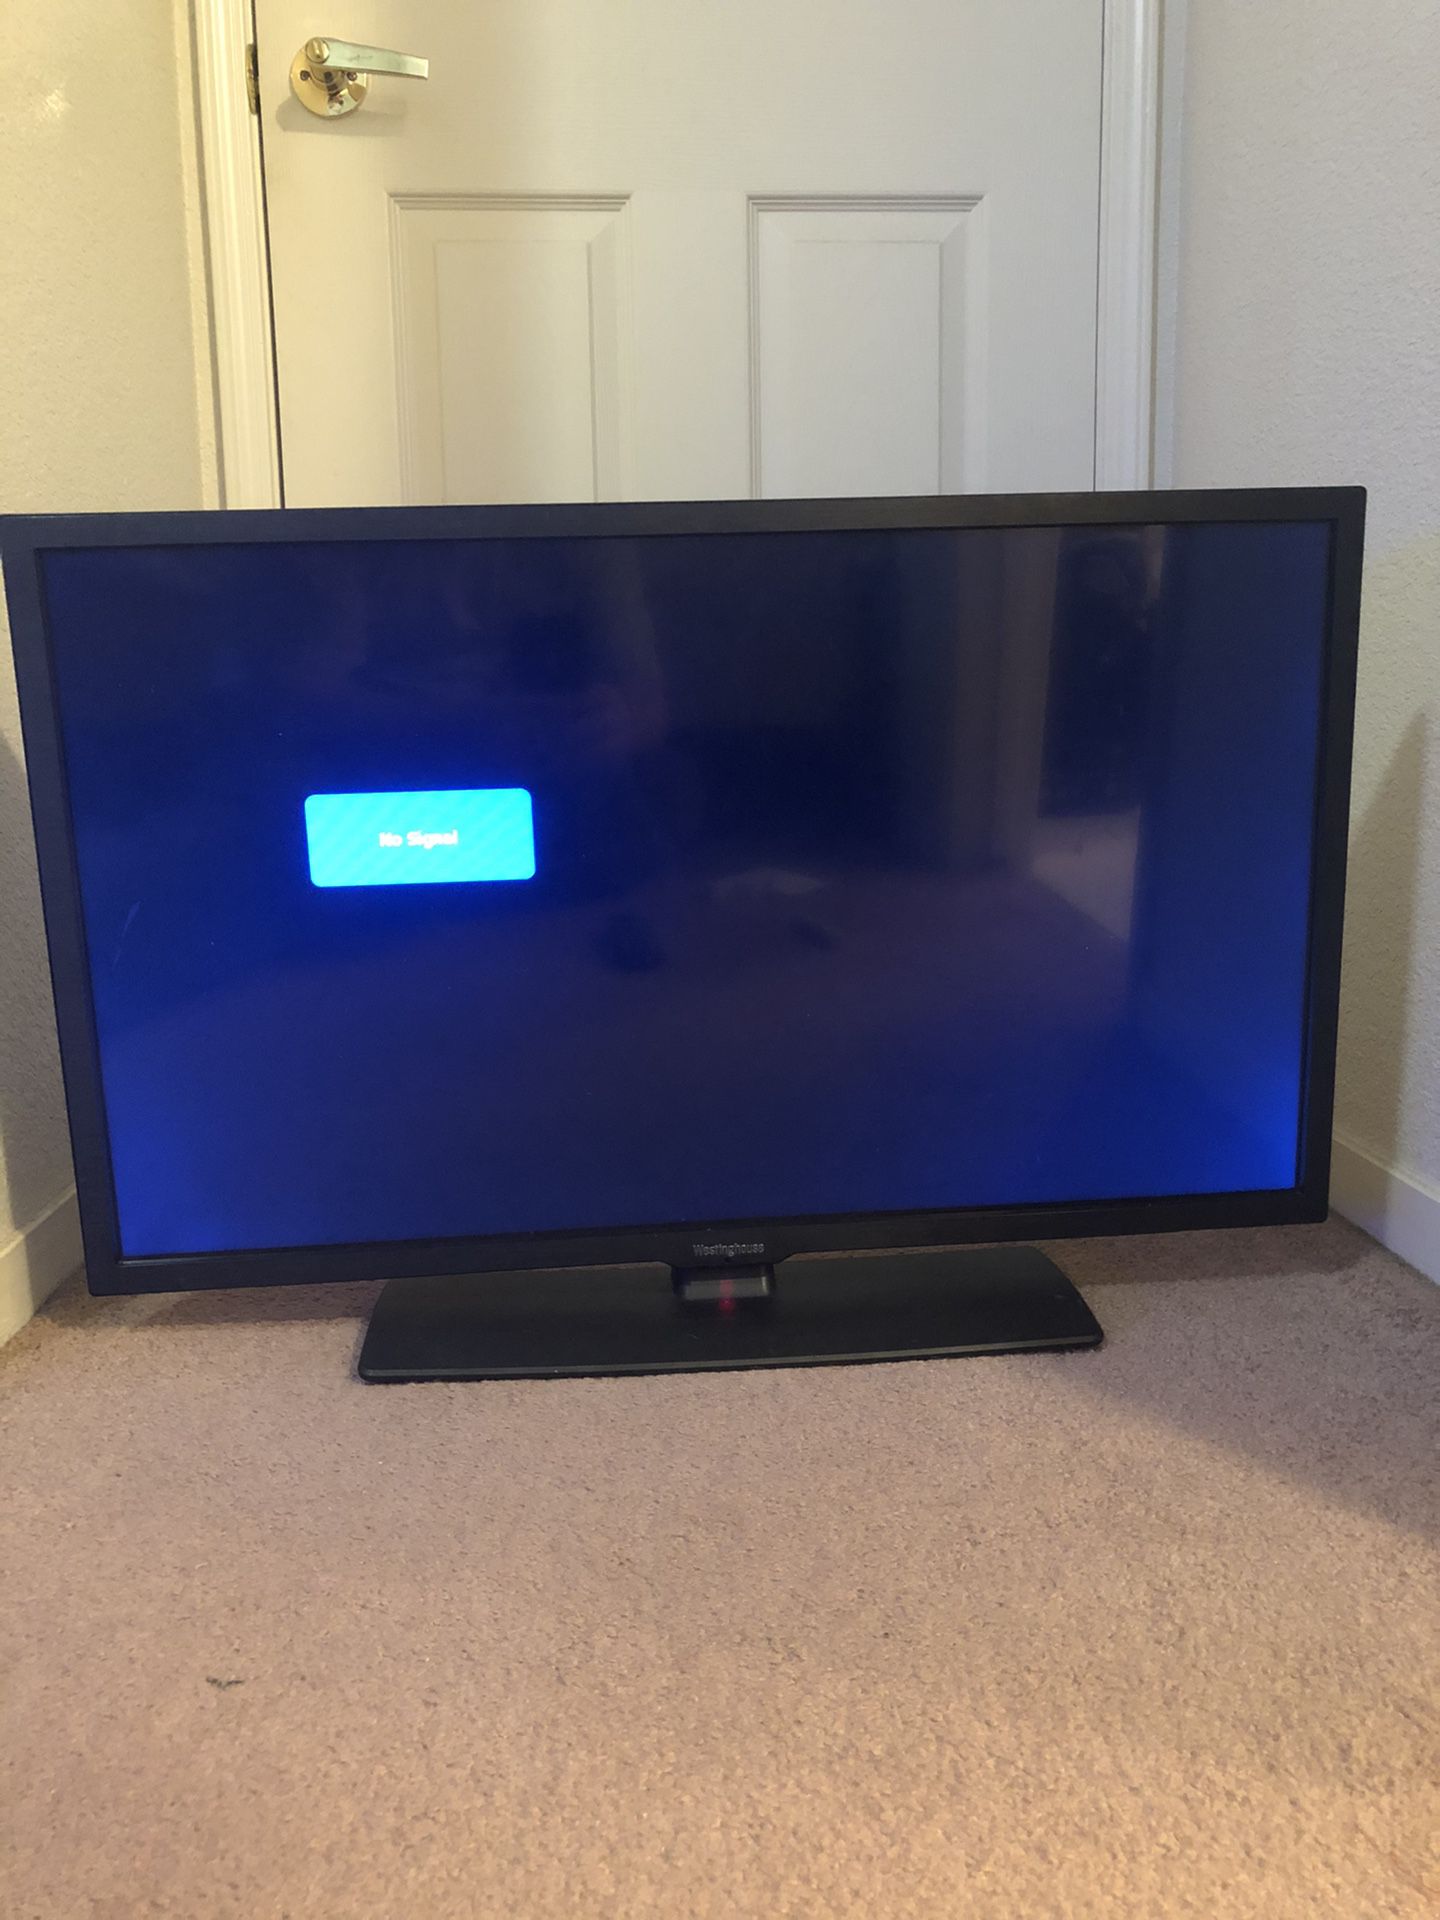 Westinghouse 32” in TV (not a smart tv)